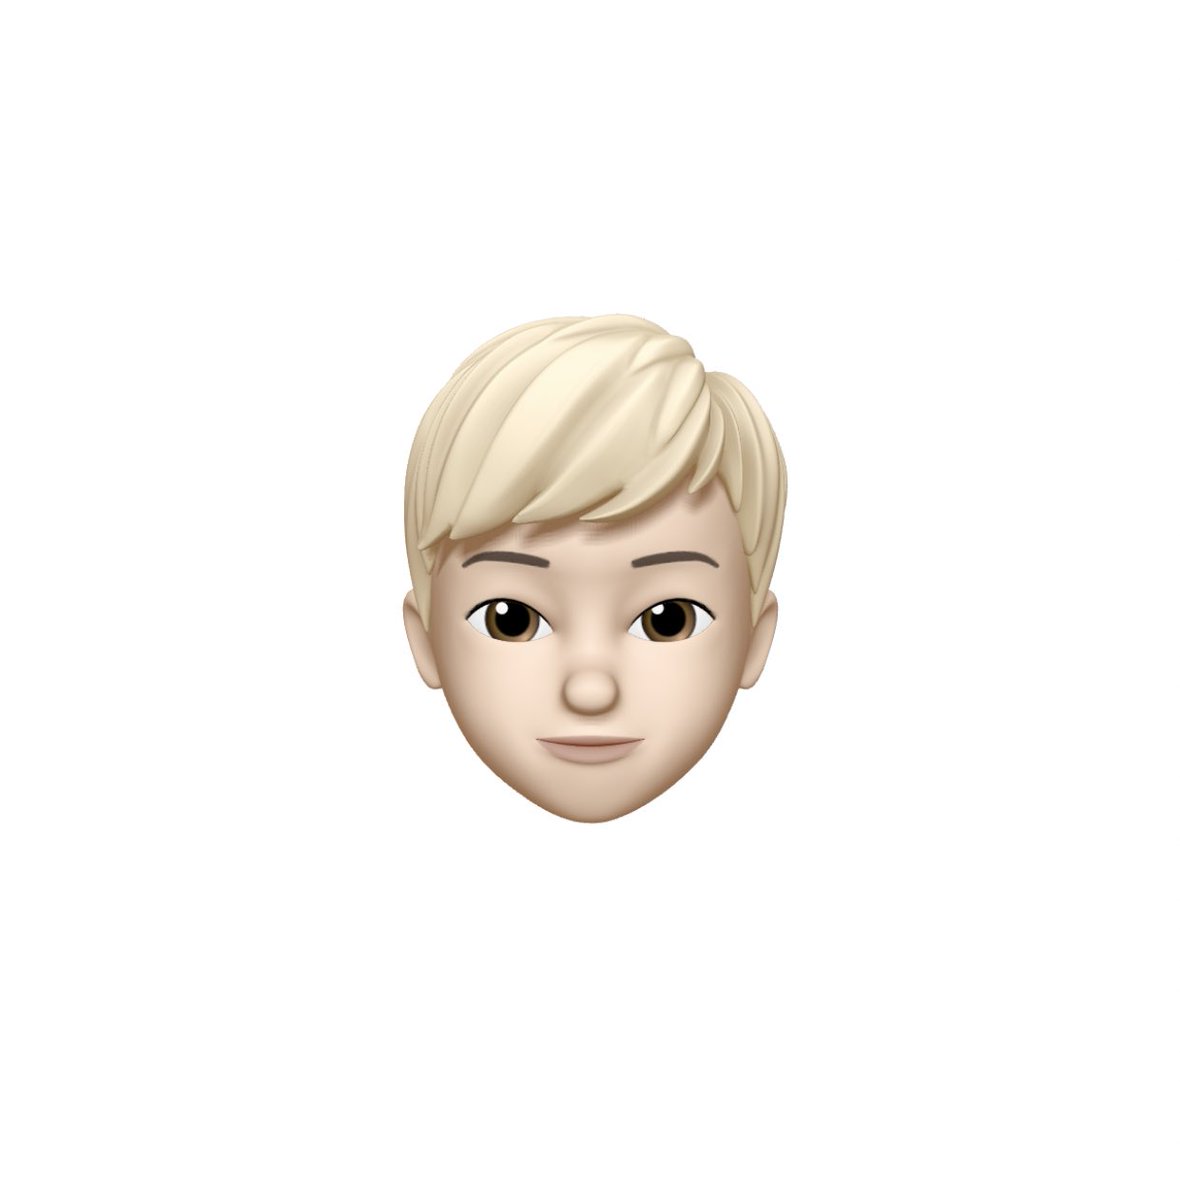 nct dream reload teaser photos as memojis - a very inaccurate but cute thread  #NCTDREAM_Reload